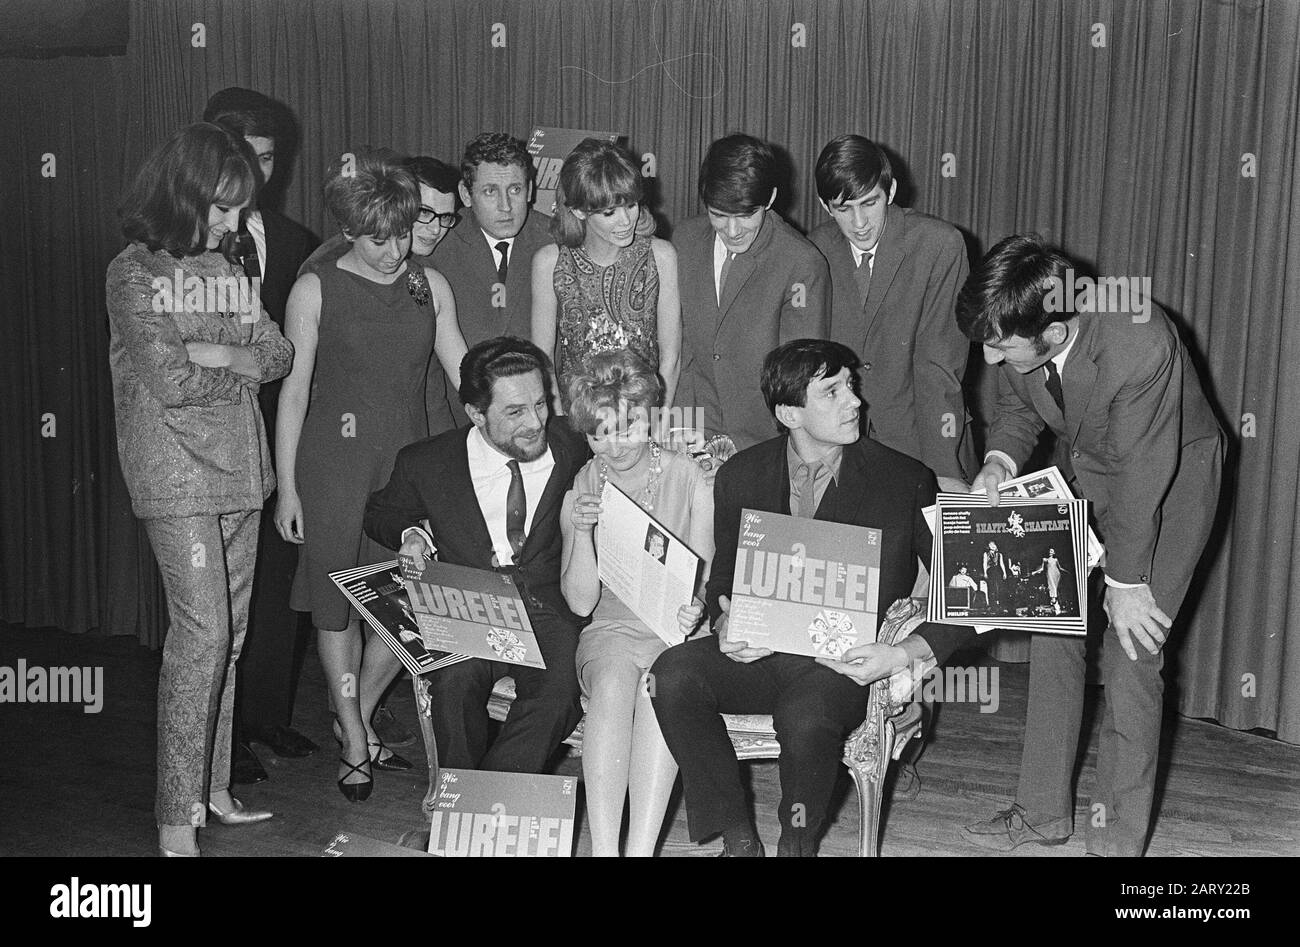 Two full-length albums published by Phonogram of Dutch cabaret groups by Lurelei and Shaffy Chantant. Standing from l.n.r. Liesbeth List; Polo de Haas; Maria Lindes; Ruud Bos; John Lanting; Loes Hamel; Kees van Kooten; Peter Bark; Eric Autumn. Sitting from l.n.r.: Wim Ibo; Jasperina de Jong; Ramses Shaffy Annotation: It was about the album Who is afraid of Lurelei and Shaffy Chantant Date: 5 January 1966 Keywords: cabaret, cabaret, gramophone records, petty arts, singers, singers Personal name: Hamel, Loes, Autumn, Eric, Ibo, Wim, Wim, Wim, Ibo Jong, Jasperina de, Lanting, John, List, Liesbeth Stock Photo